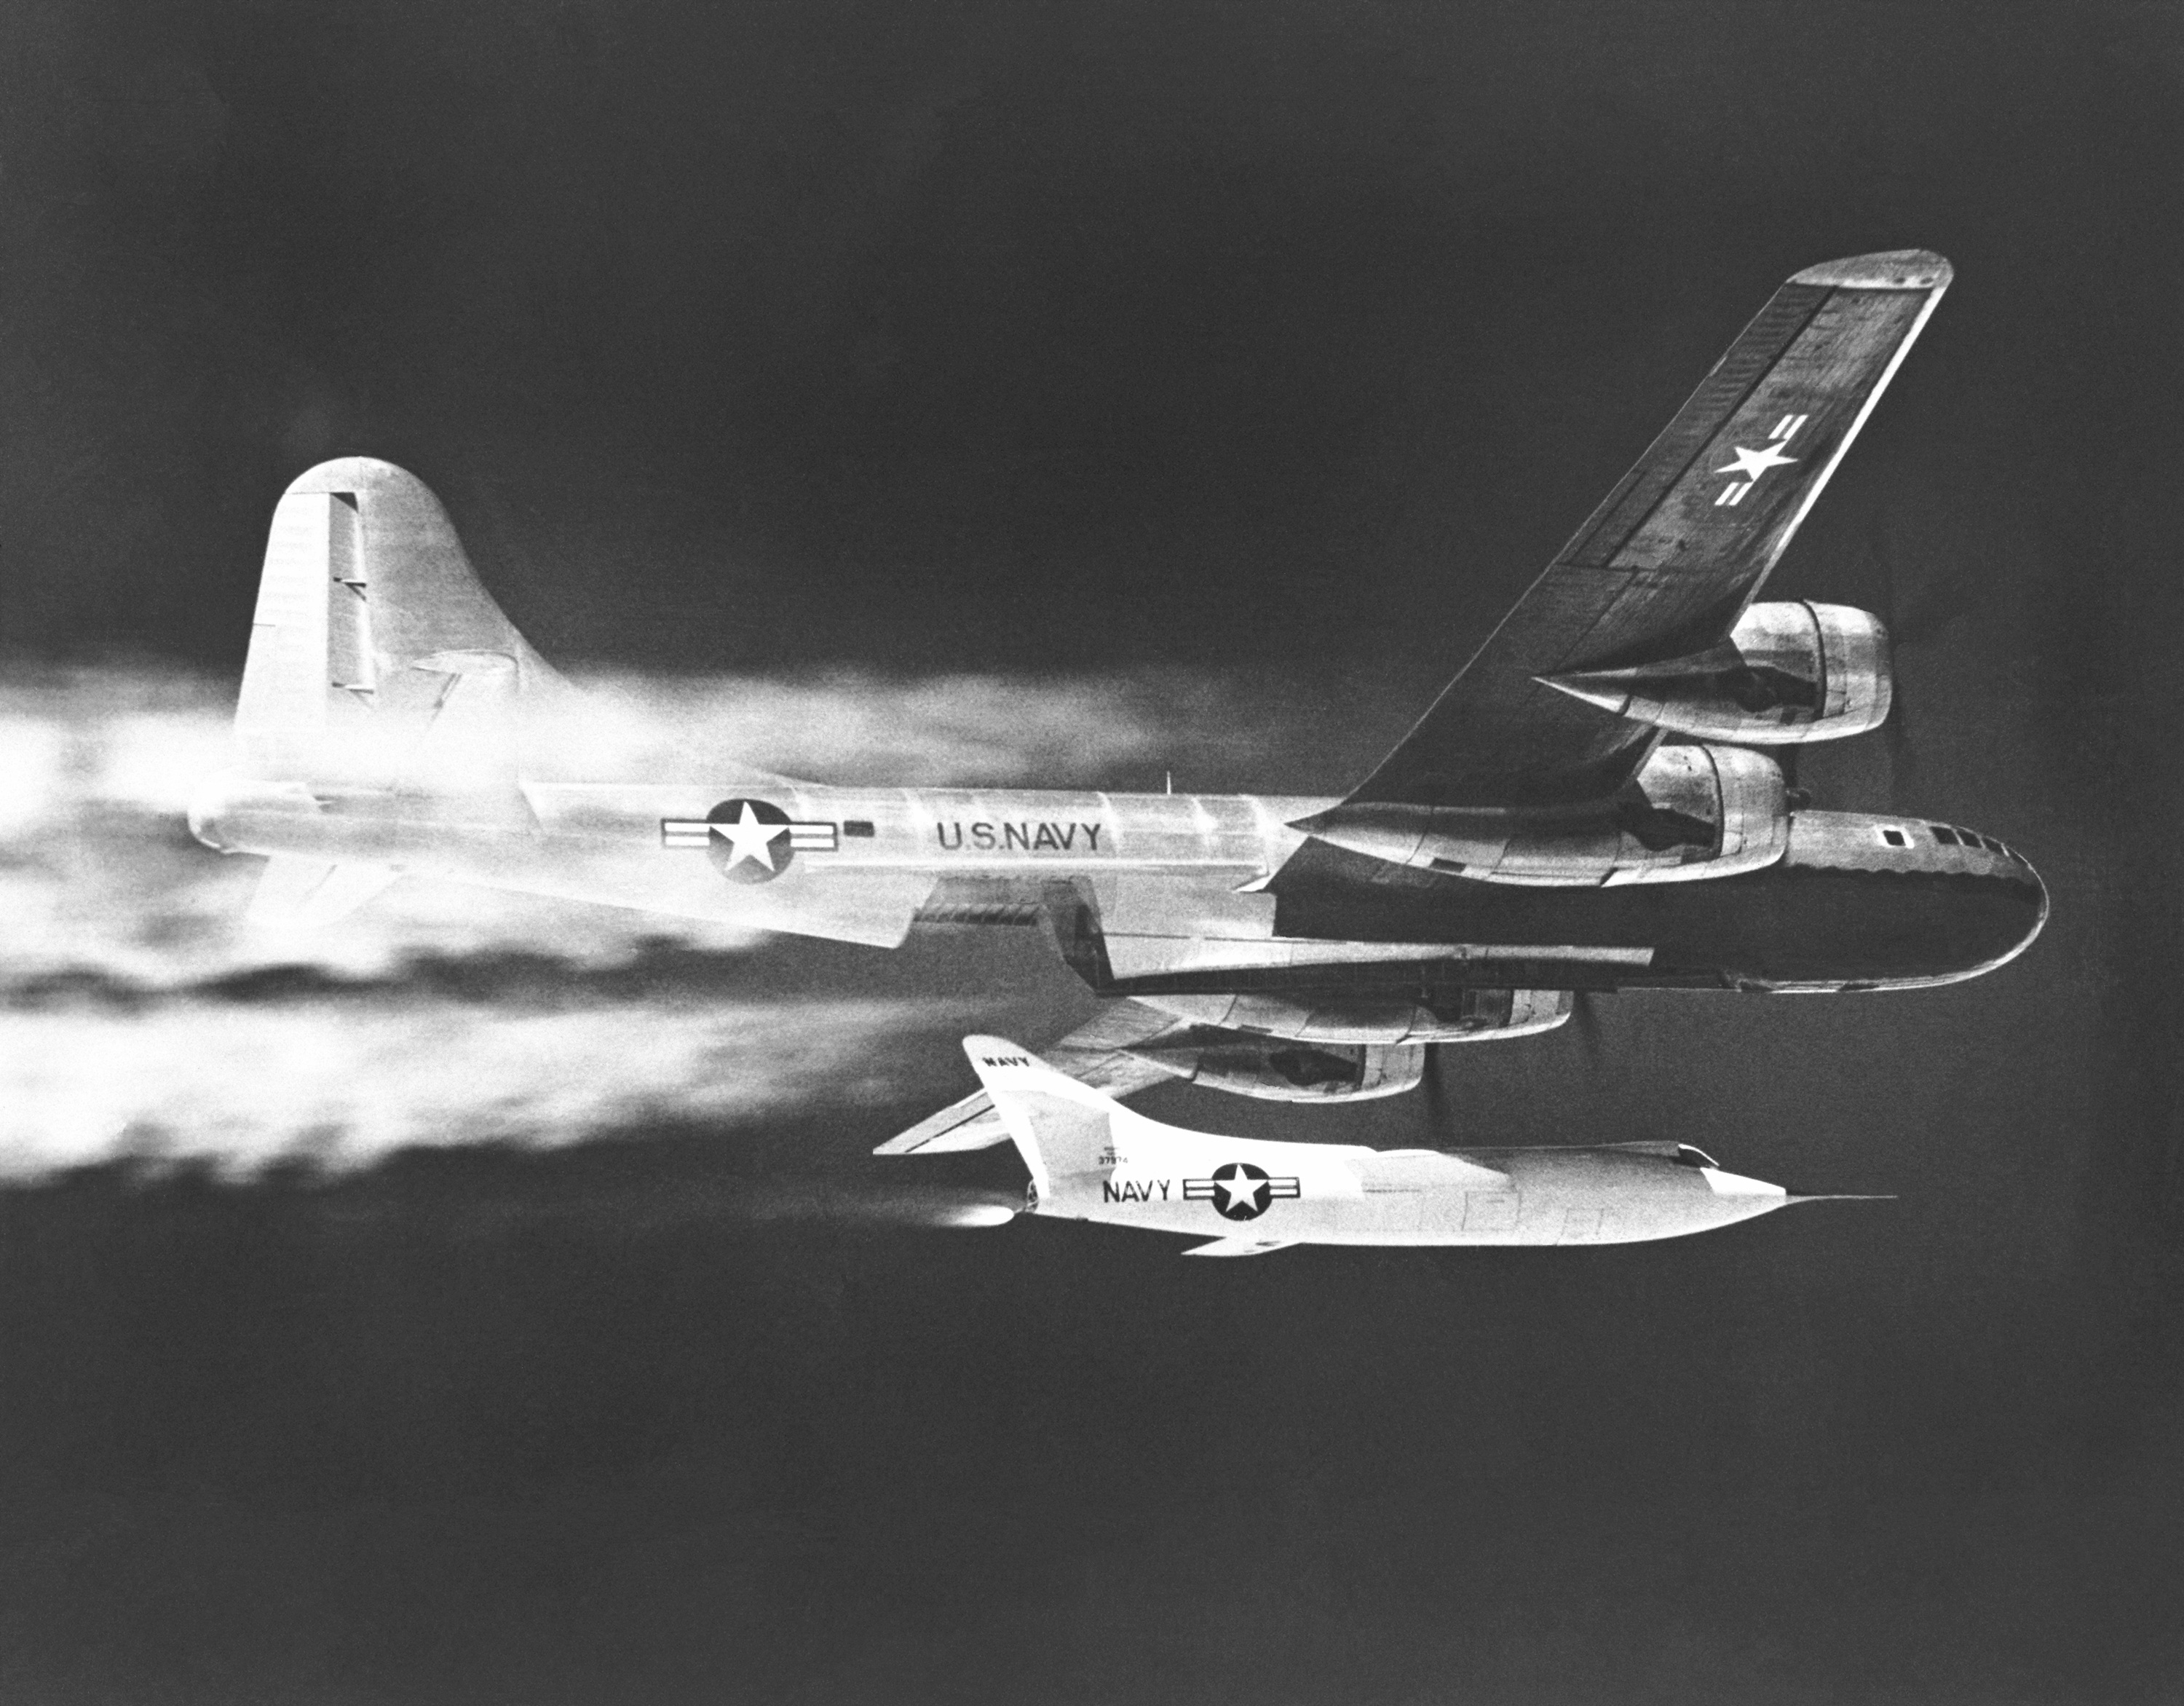 Douglas D-558-2 Bu. No. 37974 dropped from Boeing P2B-S1 Superfortress 84029, 1 January 1956. (NASA)